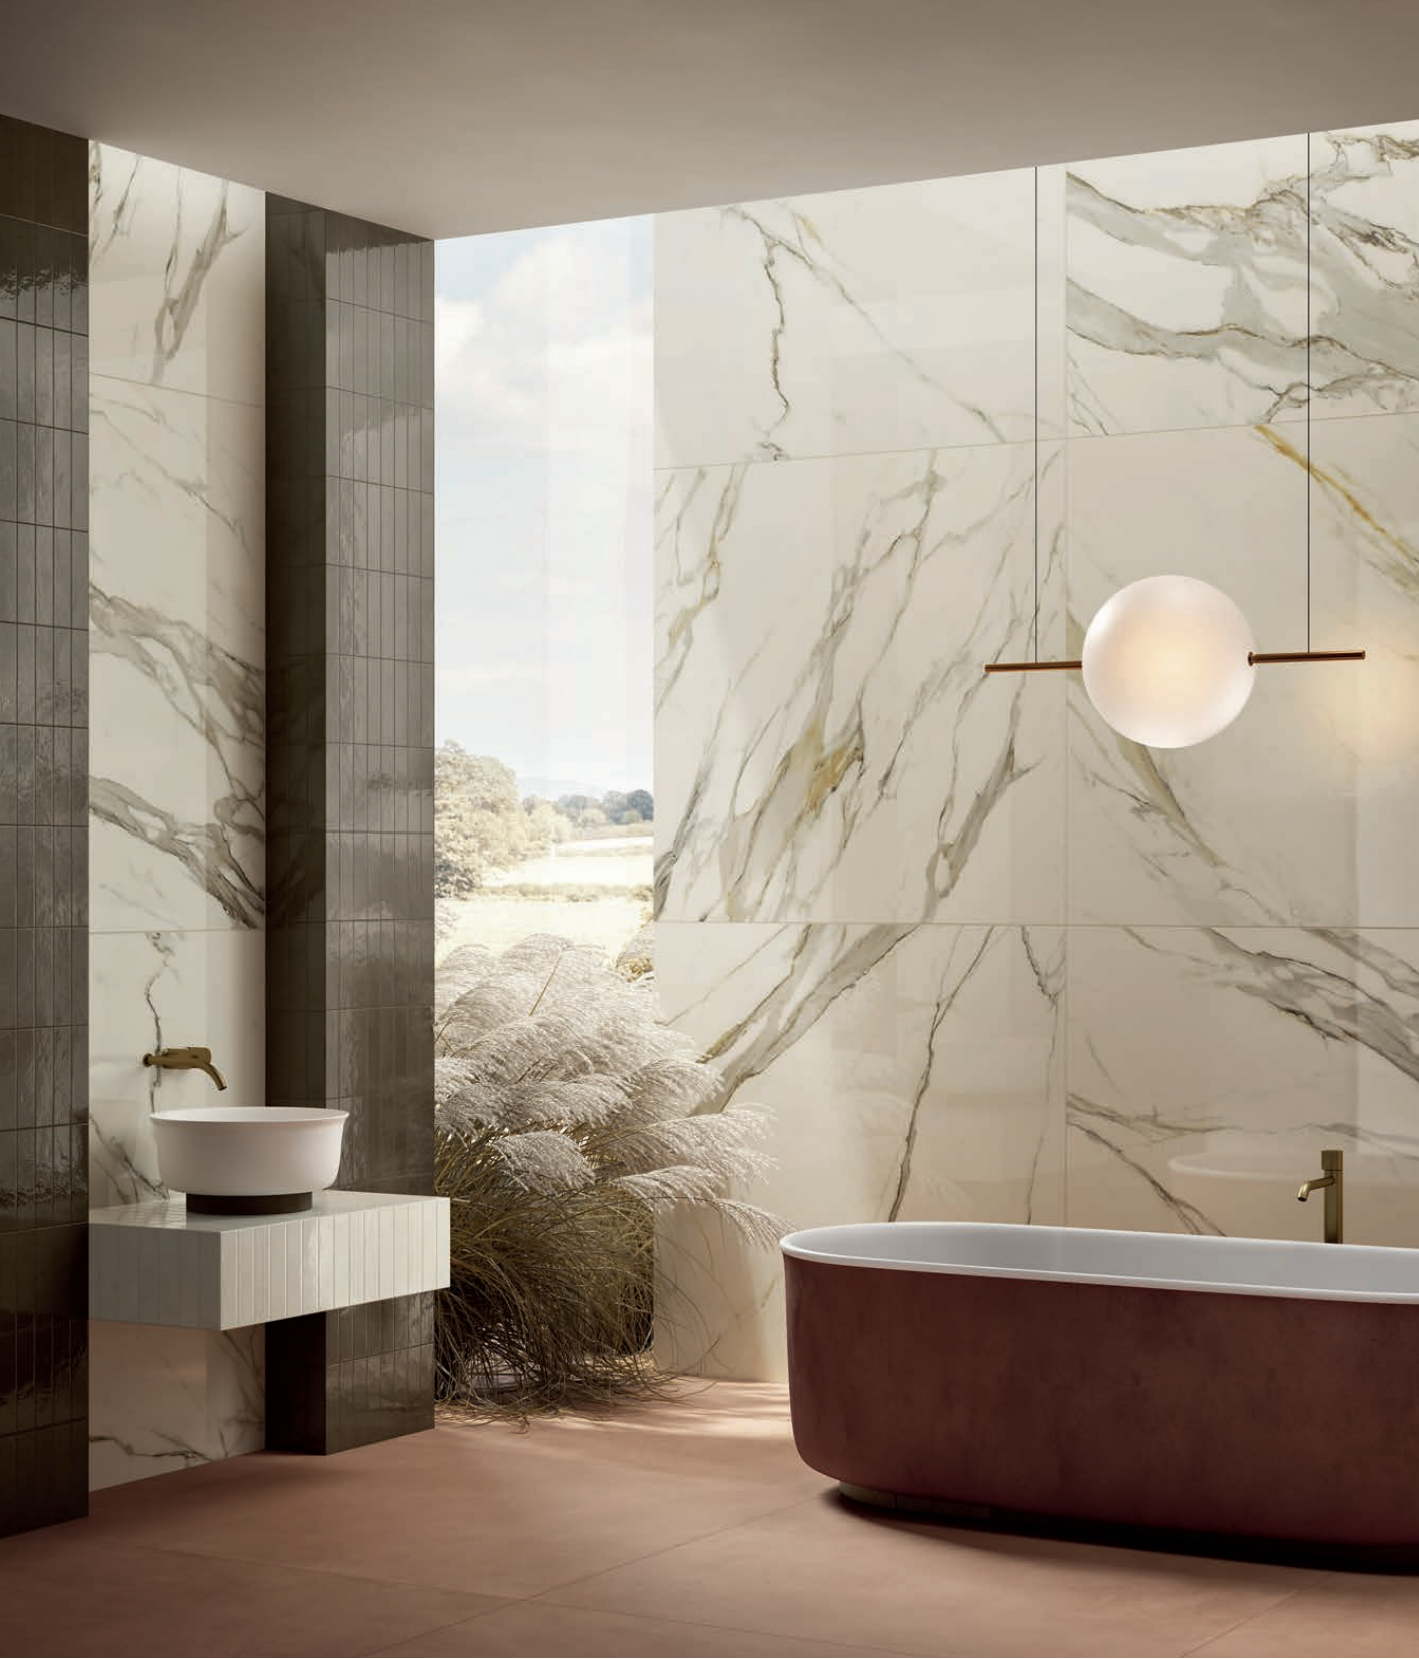 HBO 7 Calacatta Polished Rectified Gold Porcelain Tile Floor and Wall, Boutique Series by Ceramica del Conca Spa
